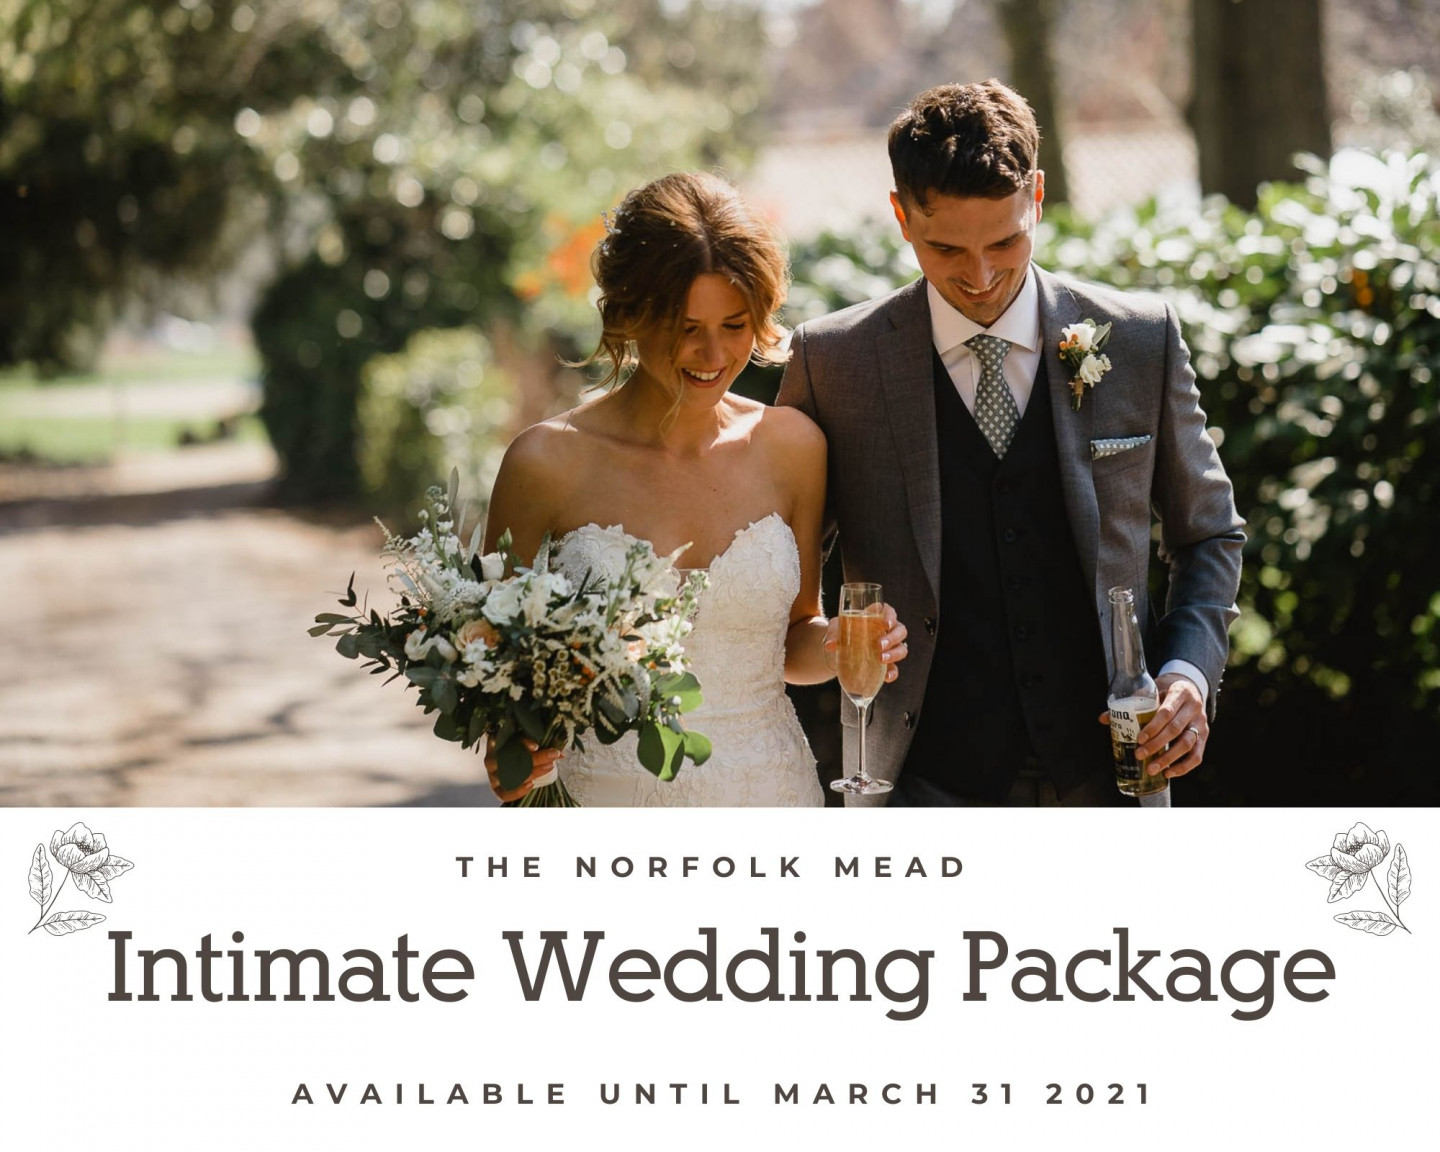 The Norfolk Mead Intimate Wedding Package